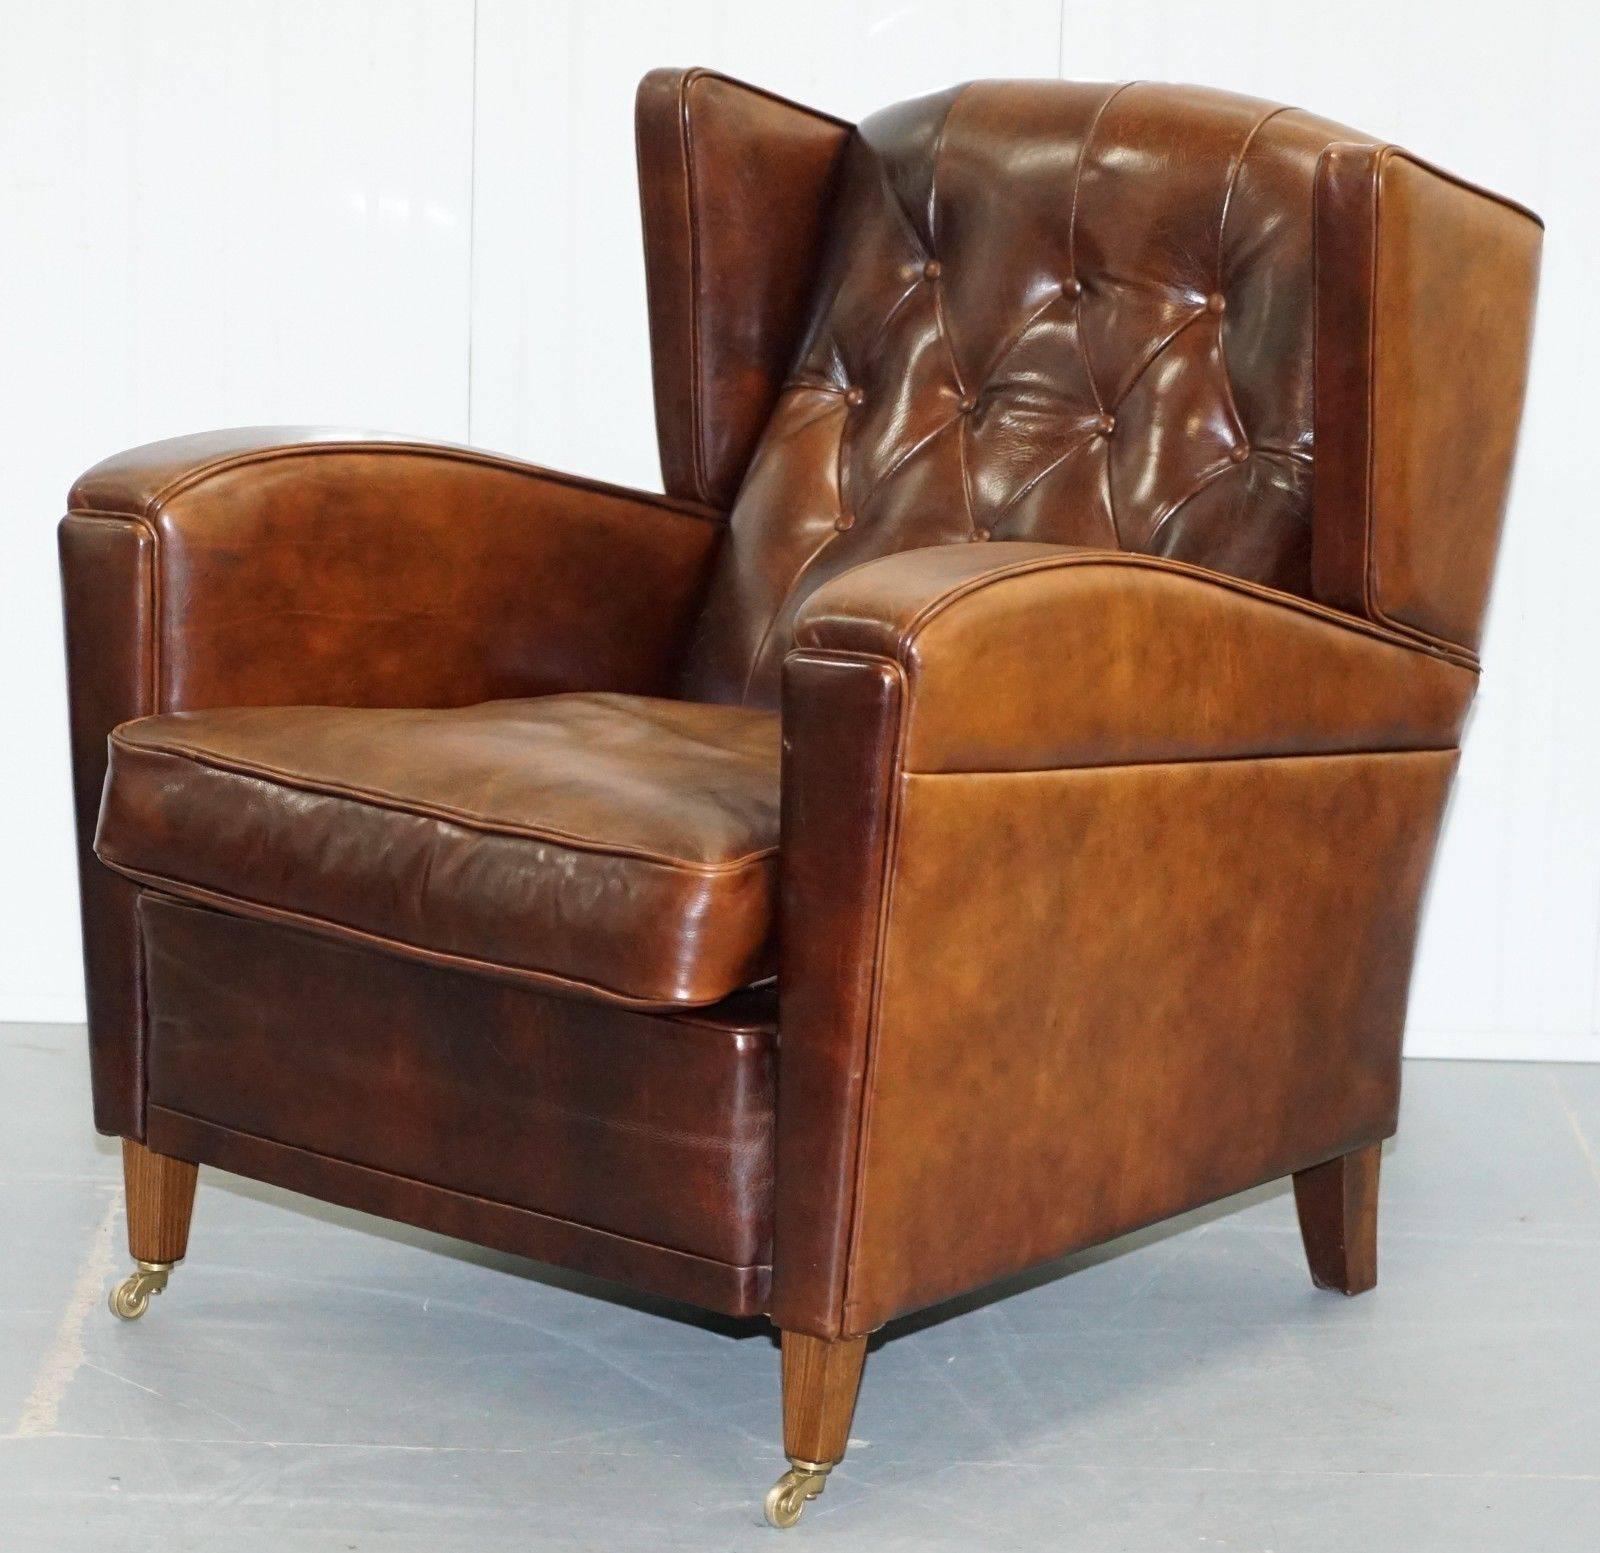 Victorian Stunning Handmade in Holland Buffalo Brown Leather Club Armchair Tuscan Feather